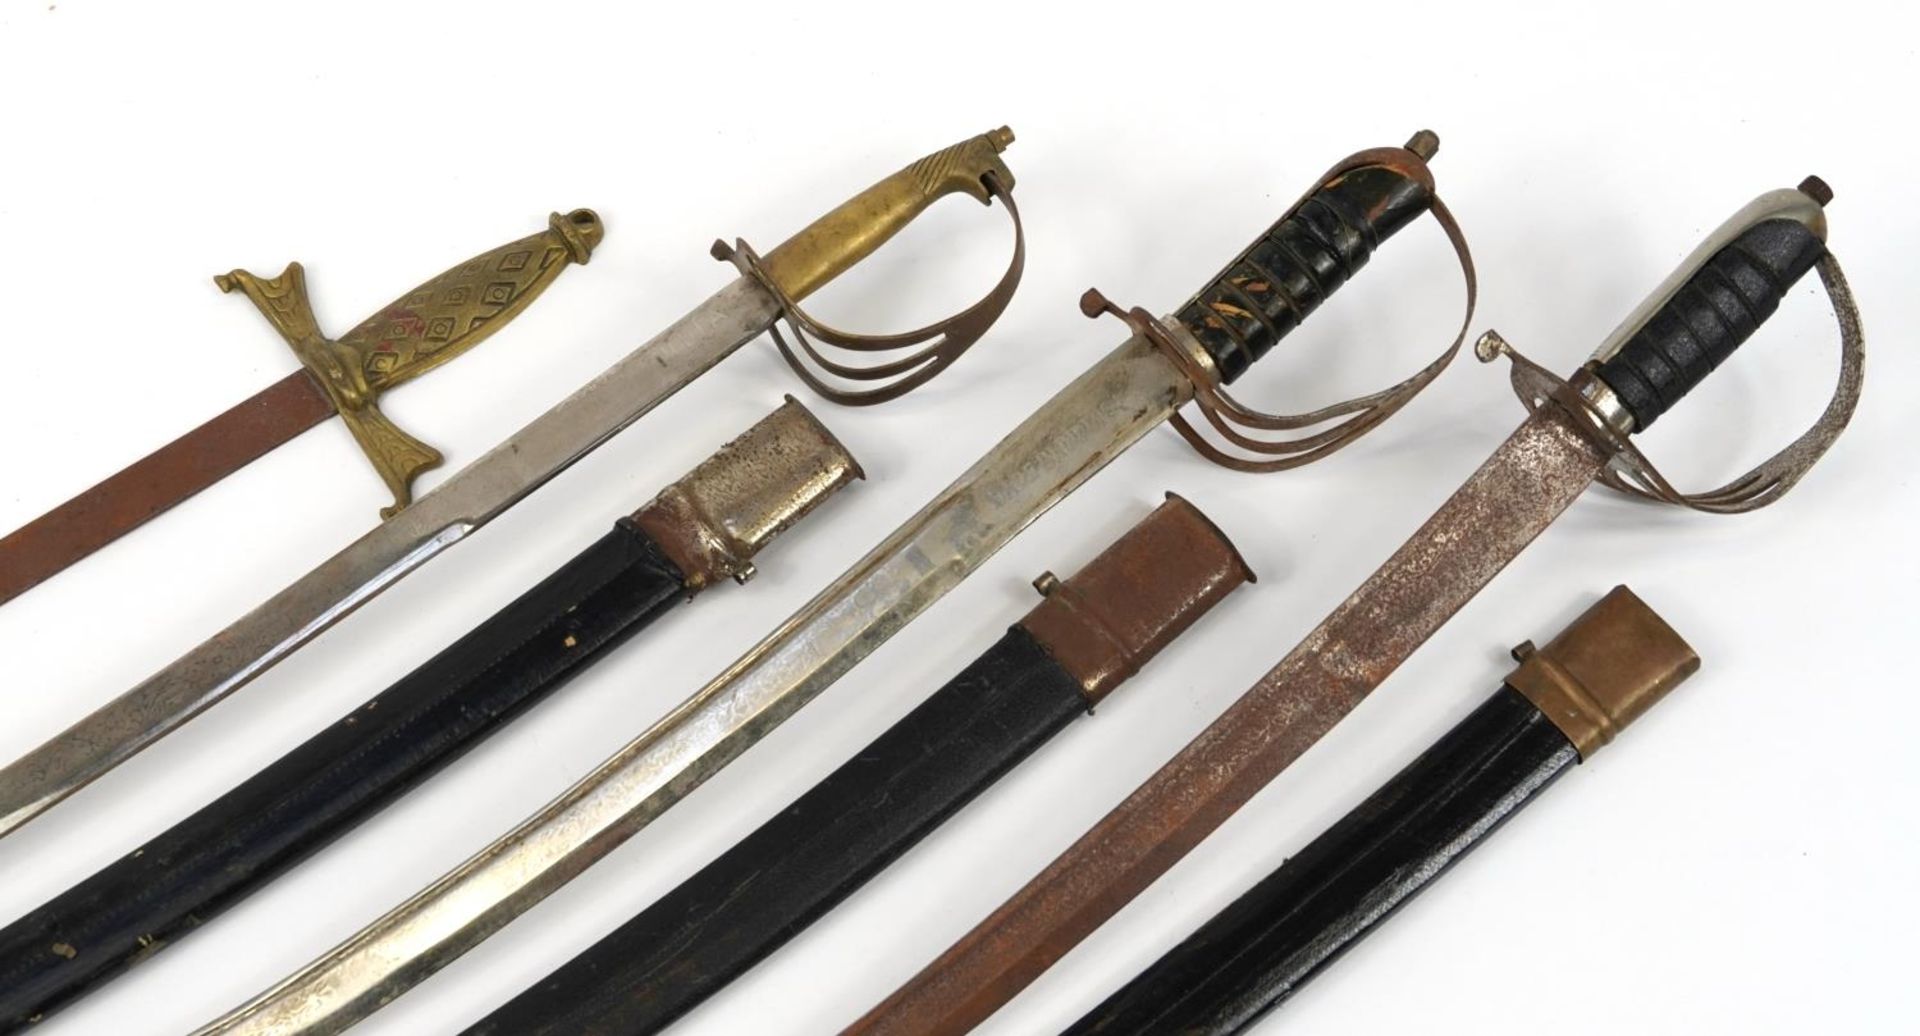 Three Indian swords with scabbards and a medieval style wall hanging sword, the largest